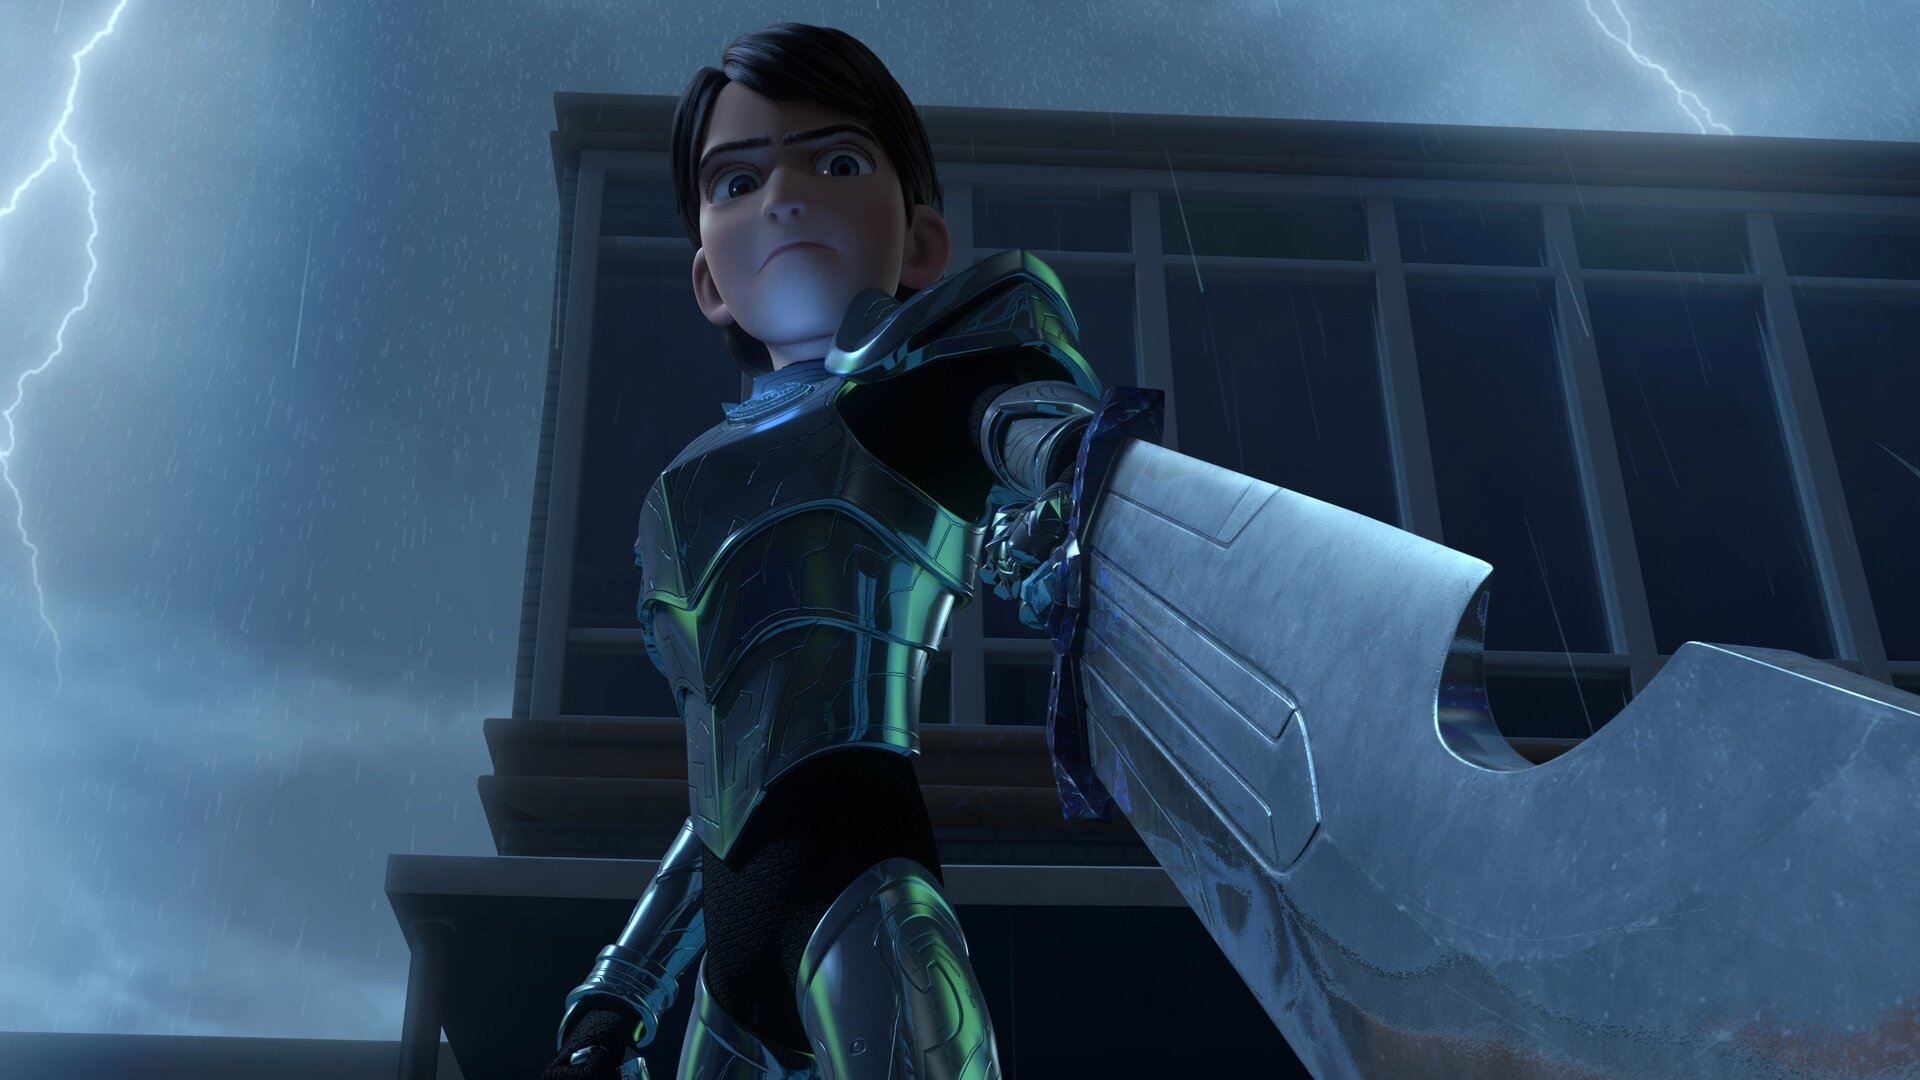 Guillermo del Toro's TROLLHUNTERS: RISE OF THE TITANS Film Has Been Announced